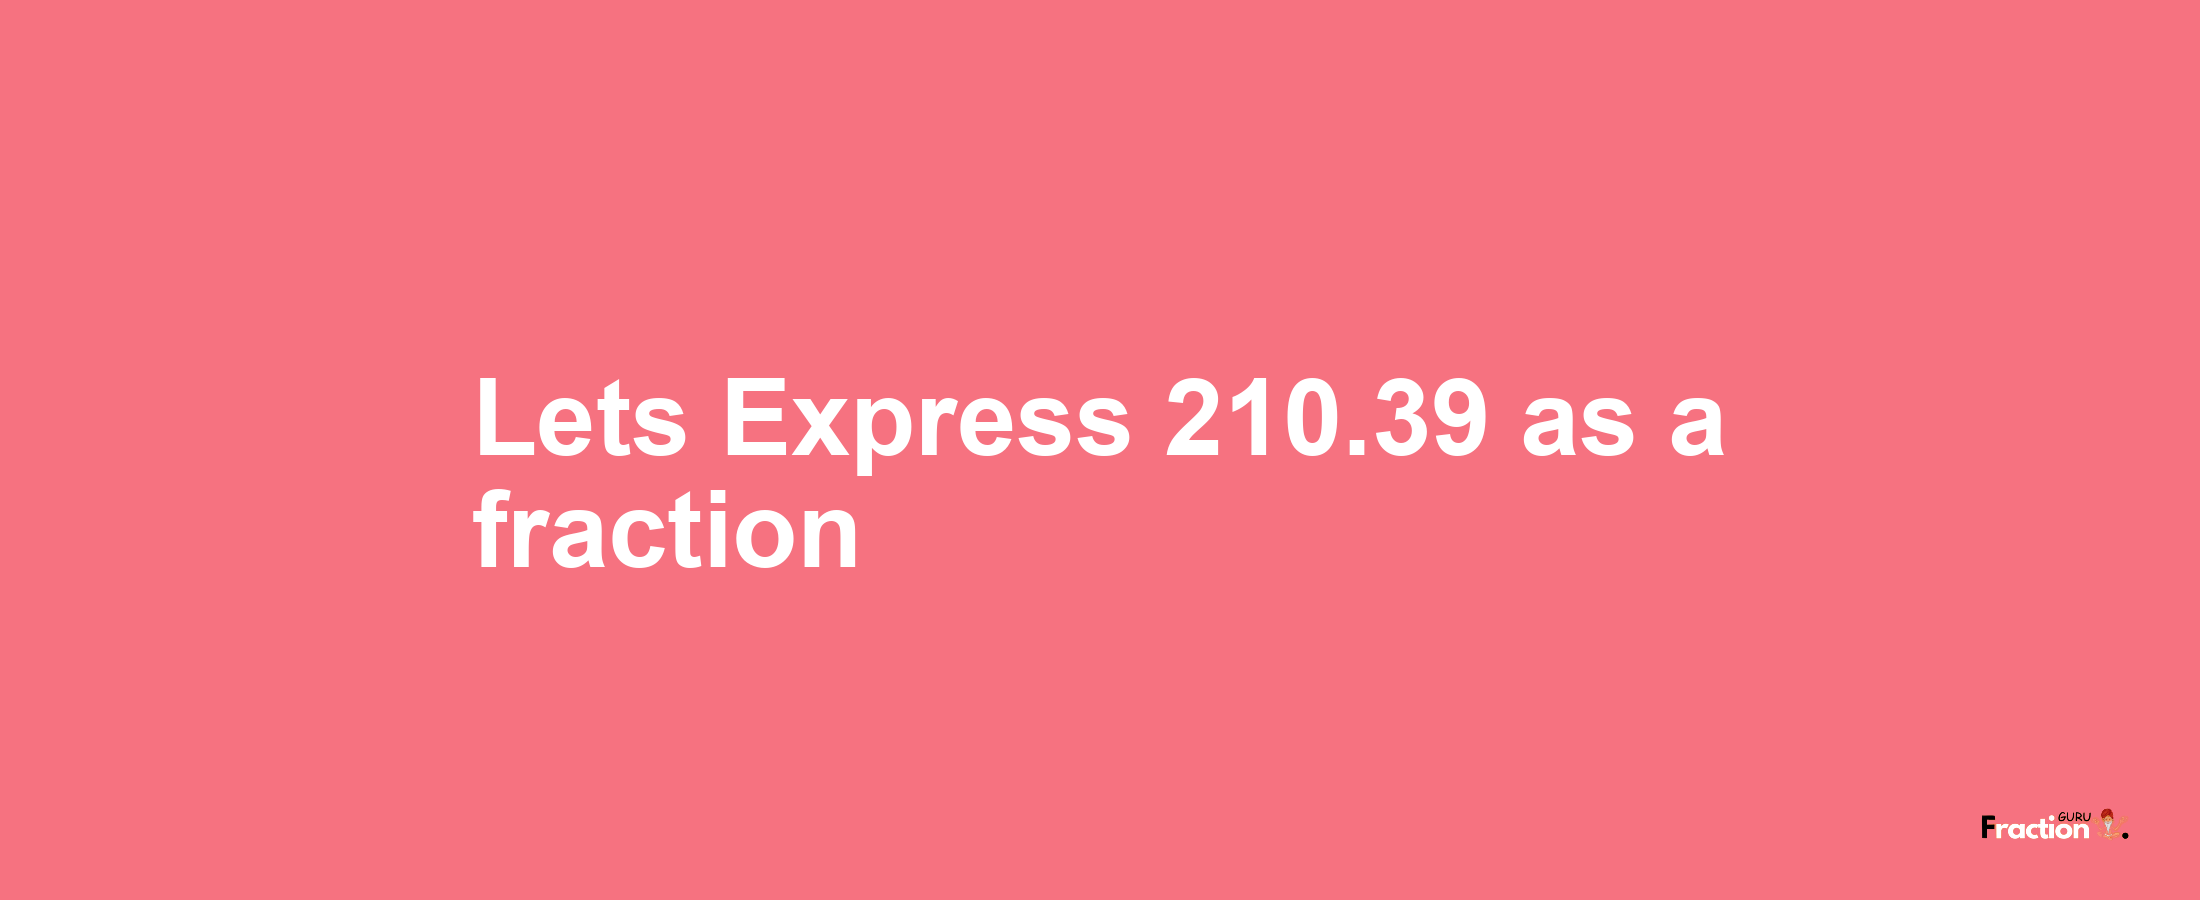 Lets Express 210.39 as afraction